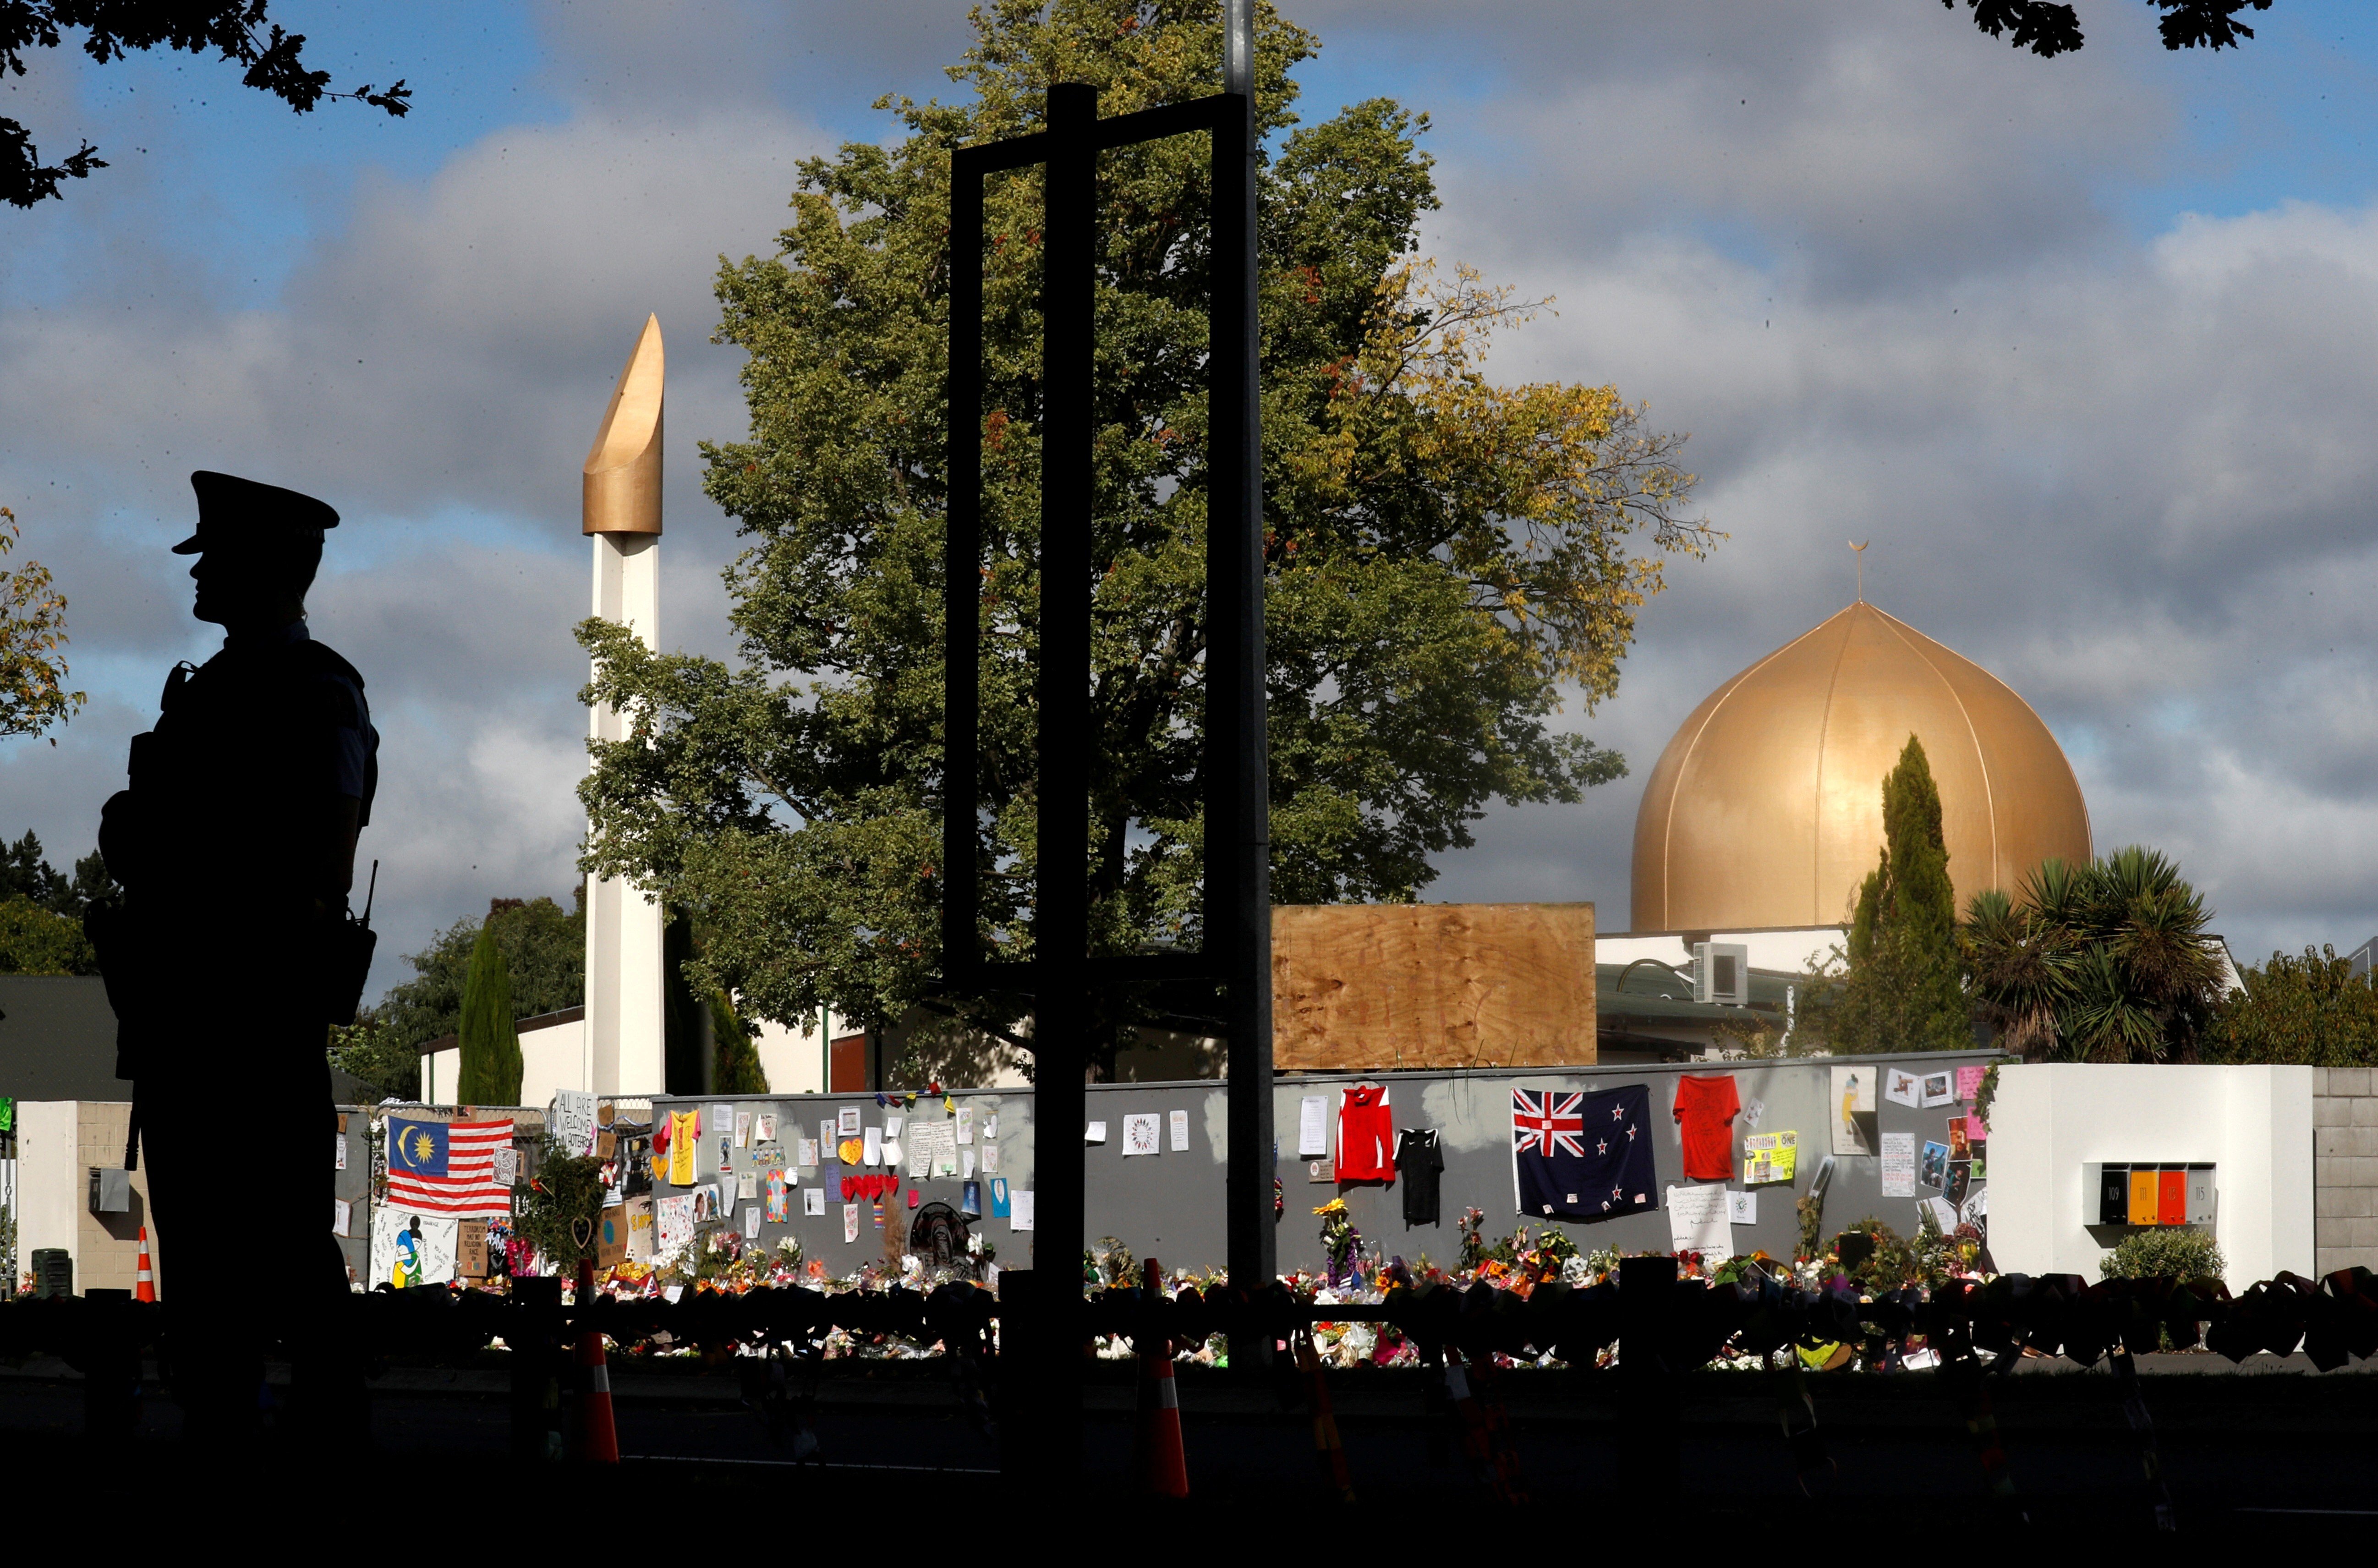 The Christchurch shooting led to 51 deaths. Photo: Reuters